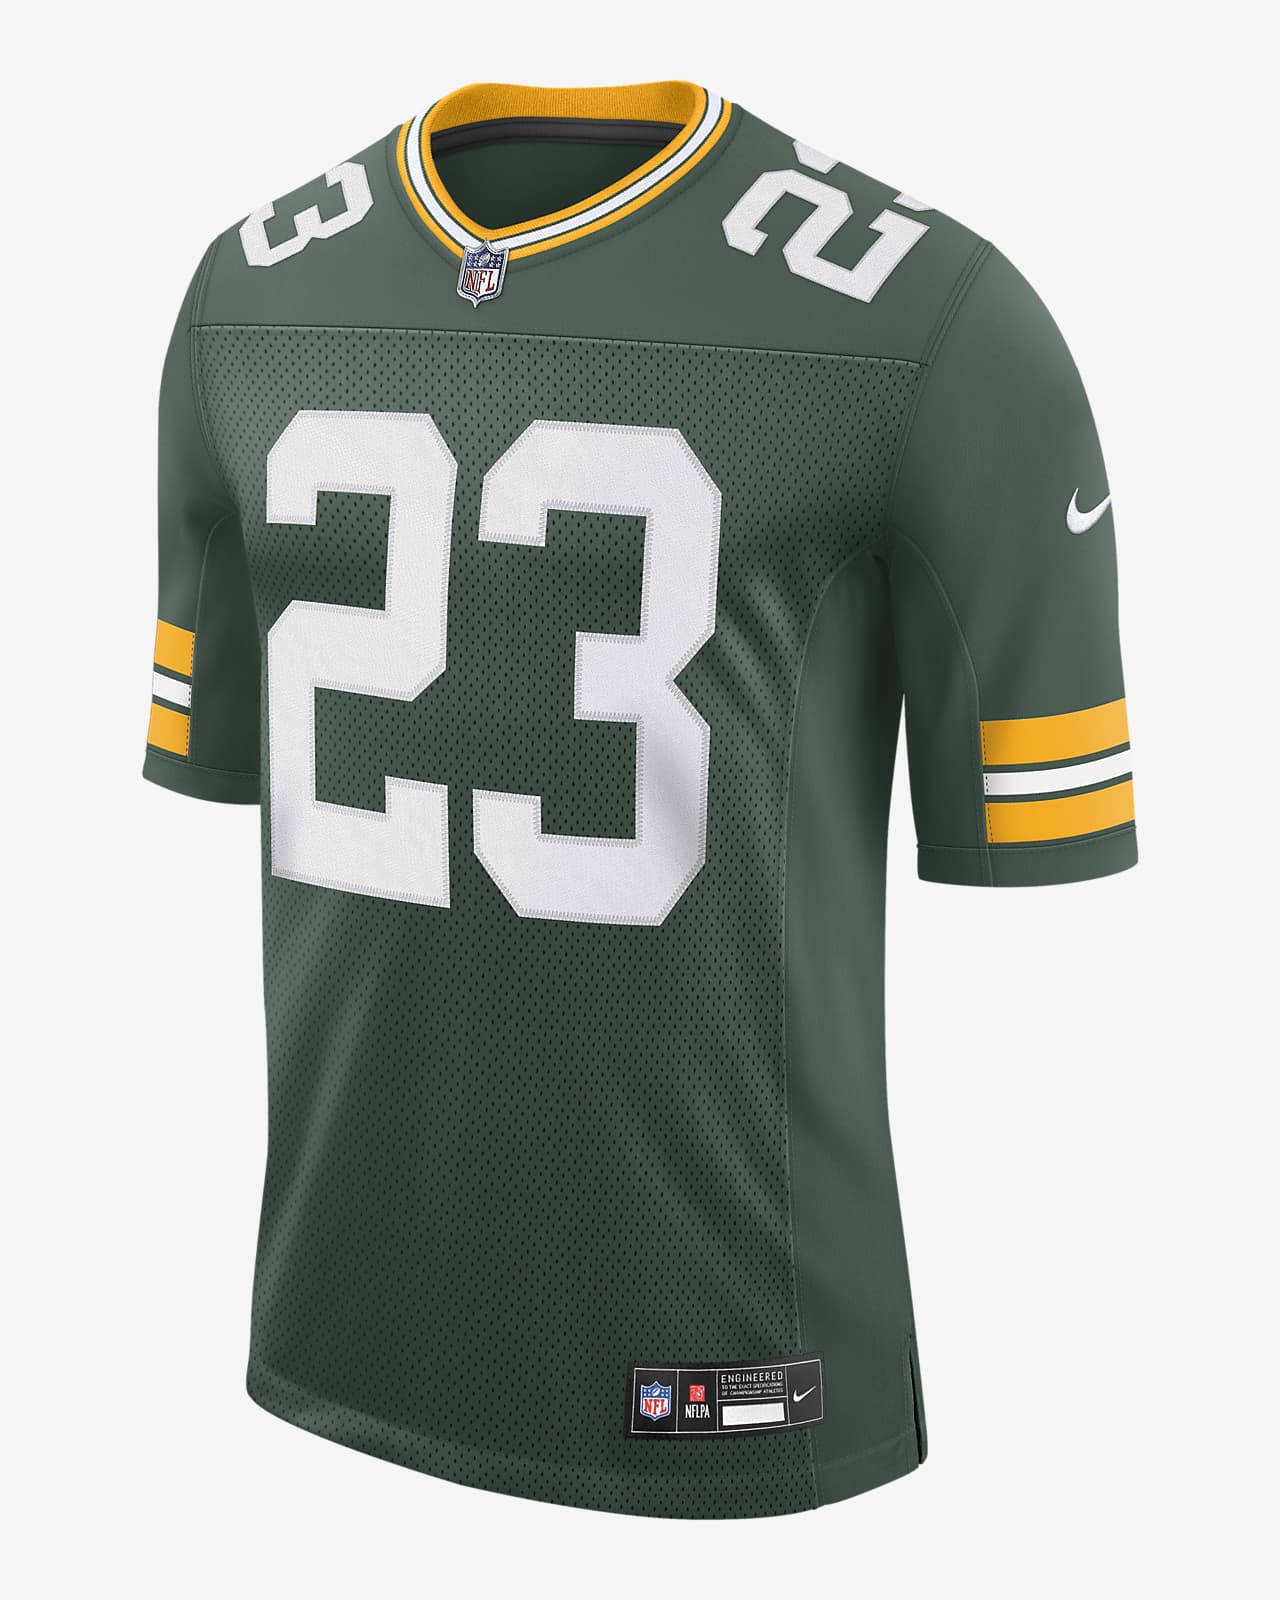 Jaire Alexander Green Bay Packers Men's Nike Dri-FIT NFL Limited Jersey